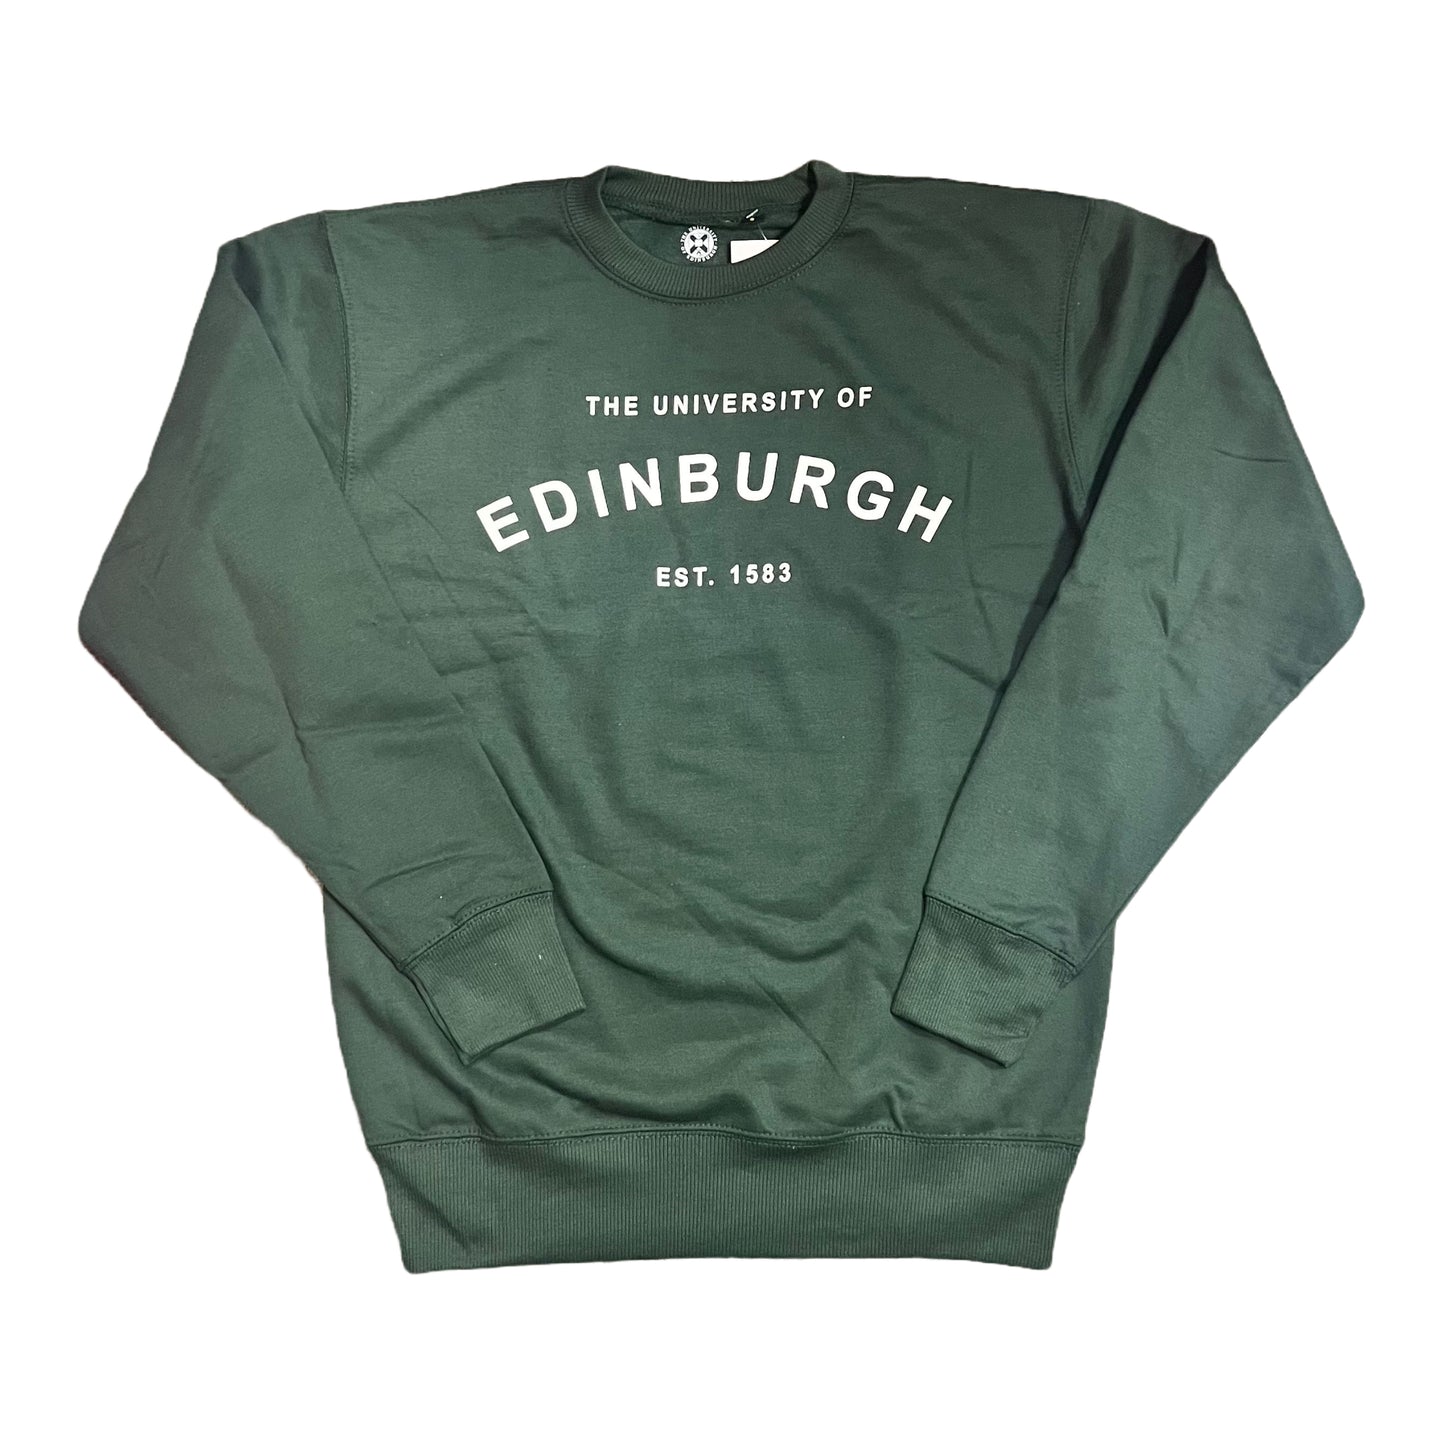 Bottle Green Sweatshirt with white text in the centre reading 'The University  of Edinburgh EST. 1583'. The word 'Edinburgh' Is curved.